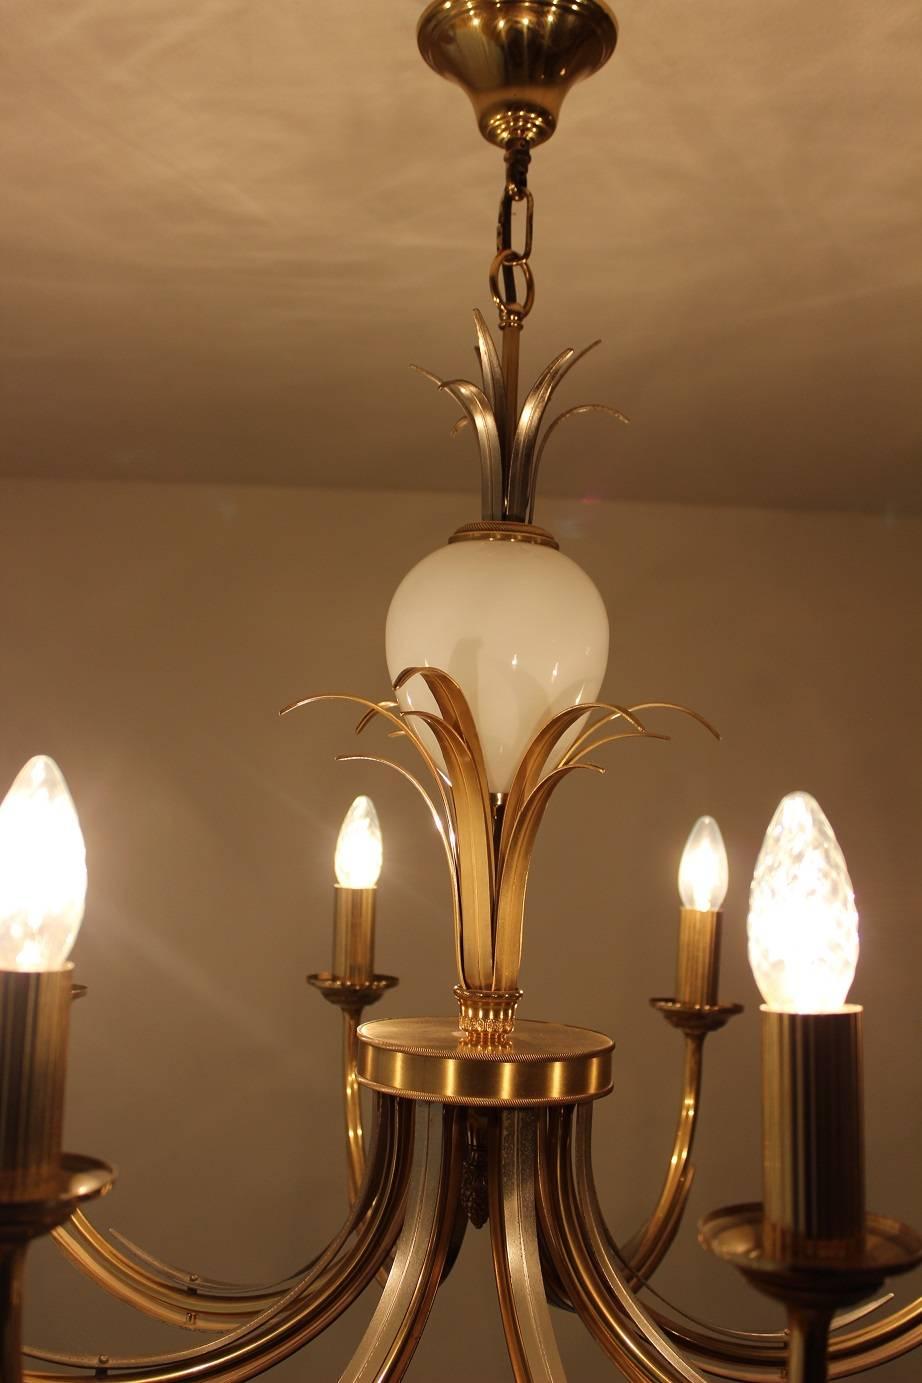 Gorgeous chandelier with ostrich porcelain egg, designed by Maison Charles manufactured in France, 1960s-1970s.
The brass leaves are decorated around the porcelain egg
This chandelier is in excellent condition.
By Maison Charles
Comes with free